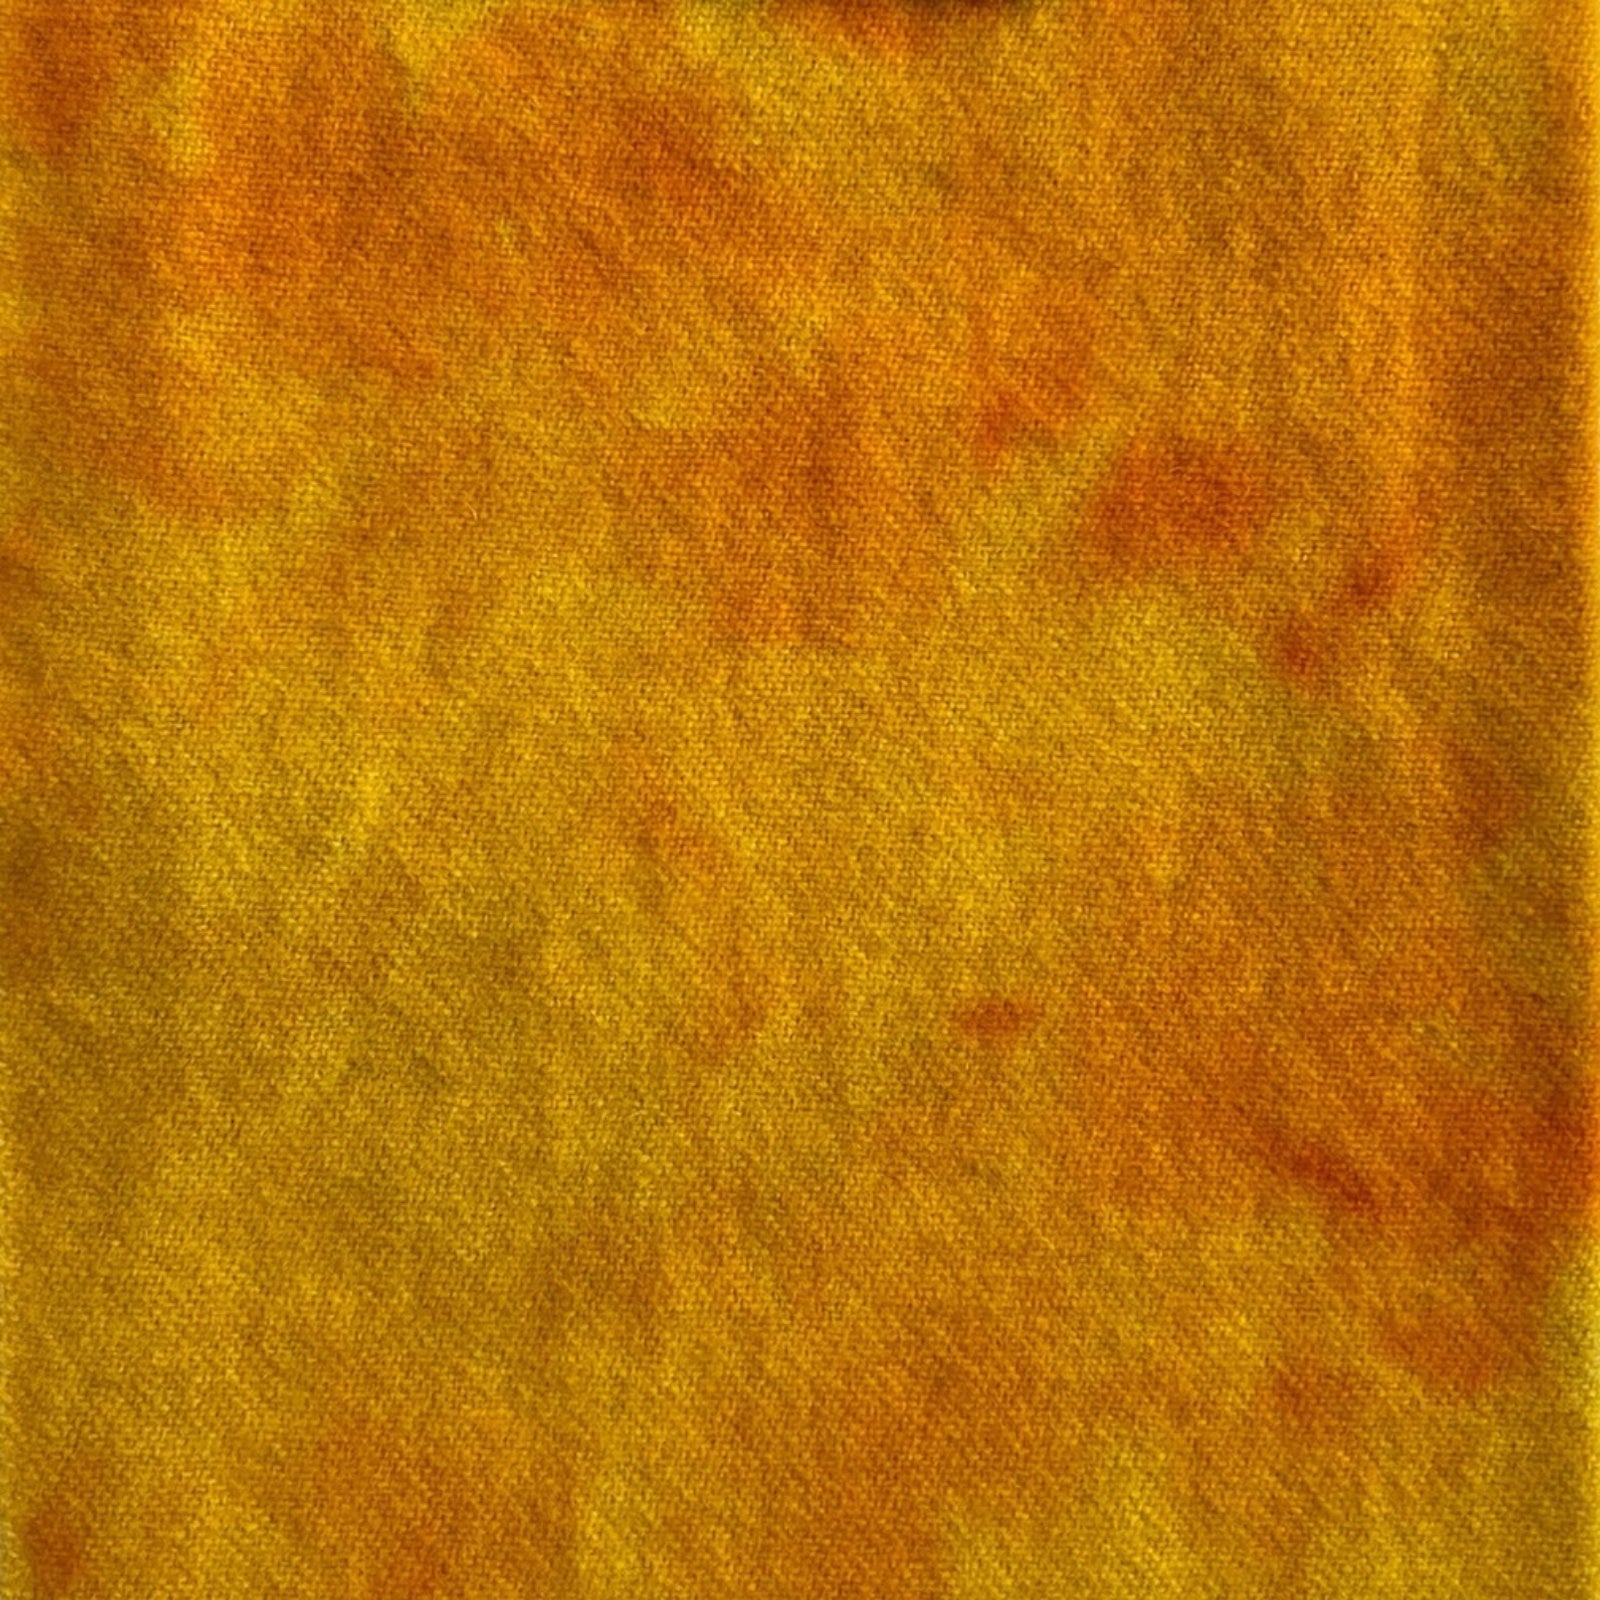 Sunshine - Colorama Hand Dyed Wool - Offered by HoneyBee Hive Rug Hooking